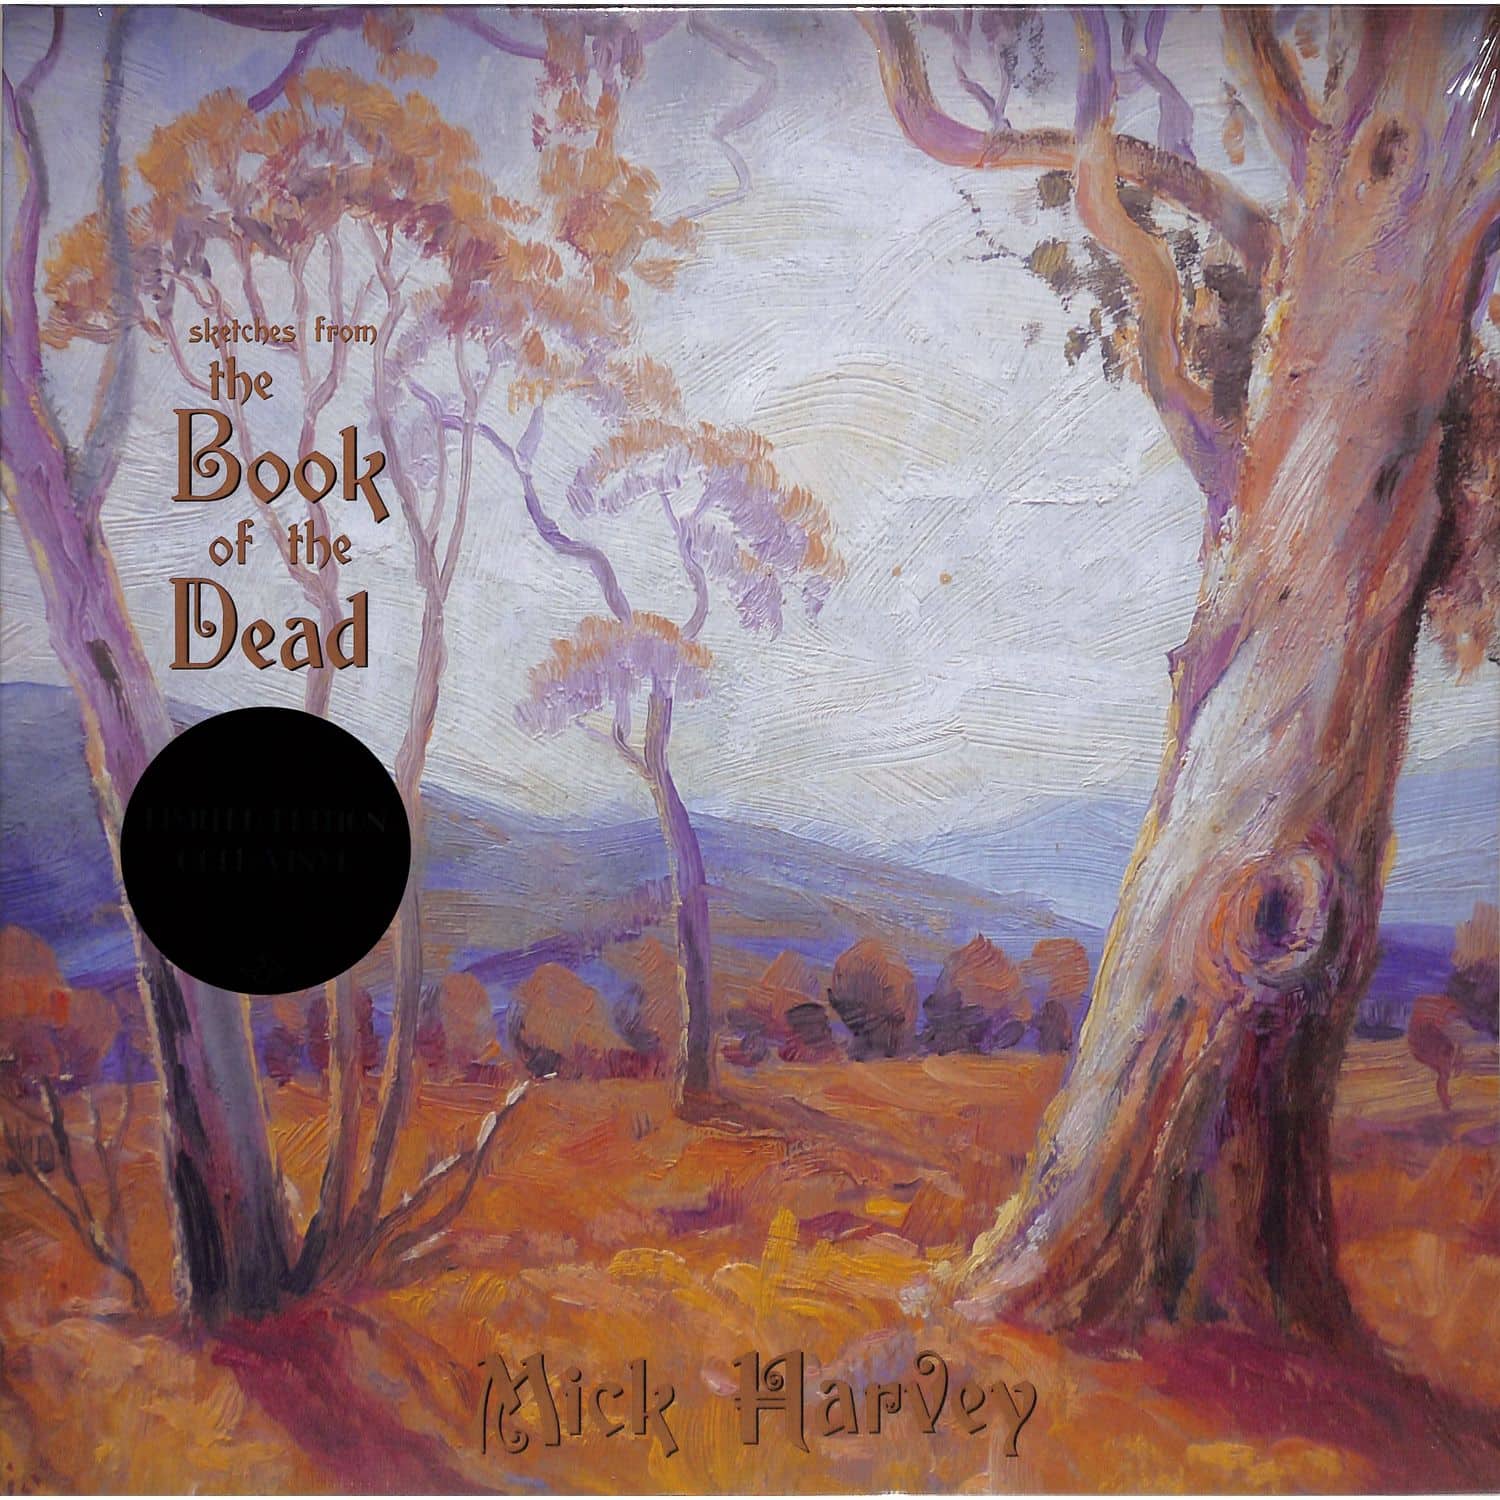 Mick Harvey - SKETCHES FROM THE BOOK OF THE DEAD 